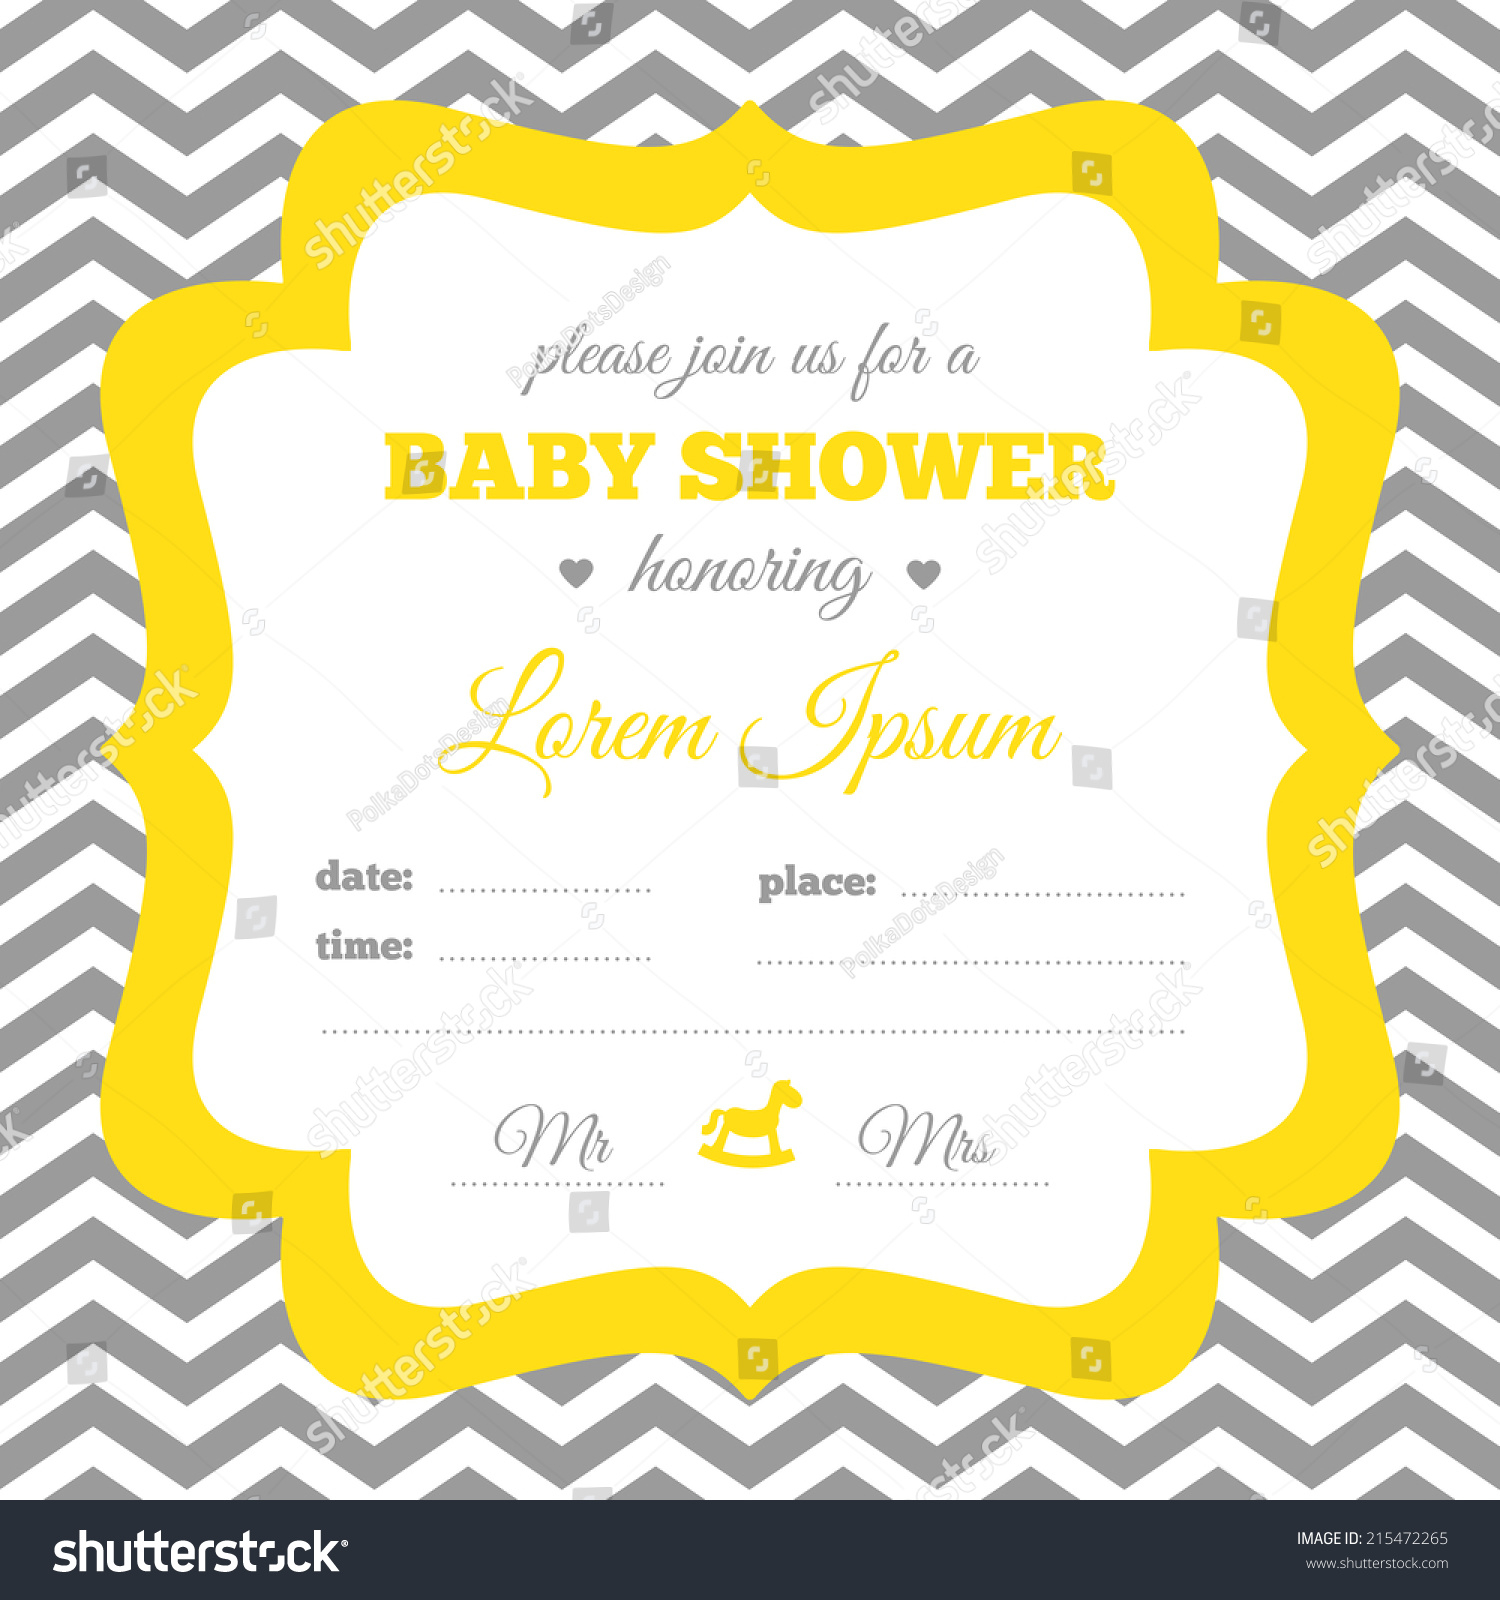 Ba Shower Invitation White Gray Yellow Stock Vector Royalty Free intended for proportions 1500 X 1600